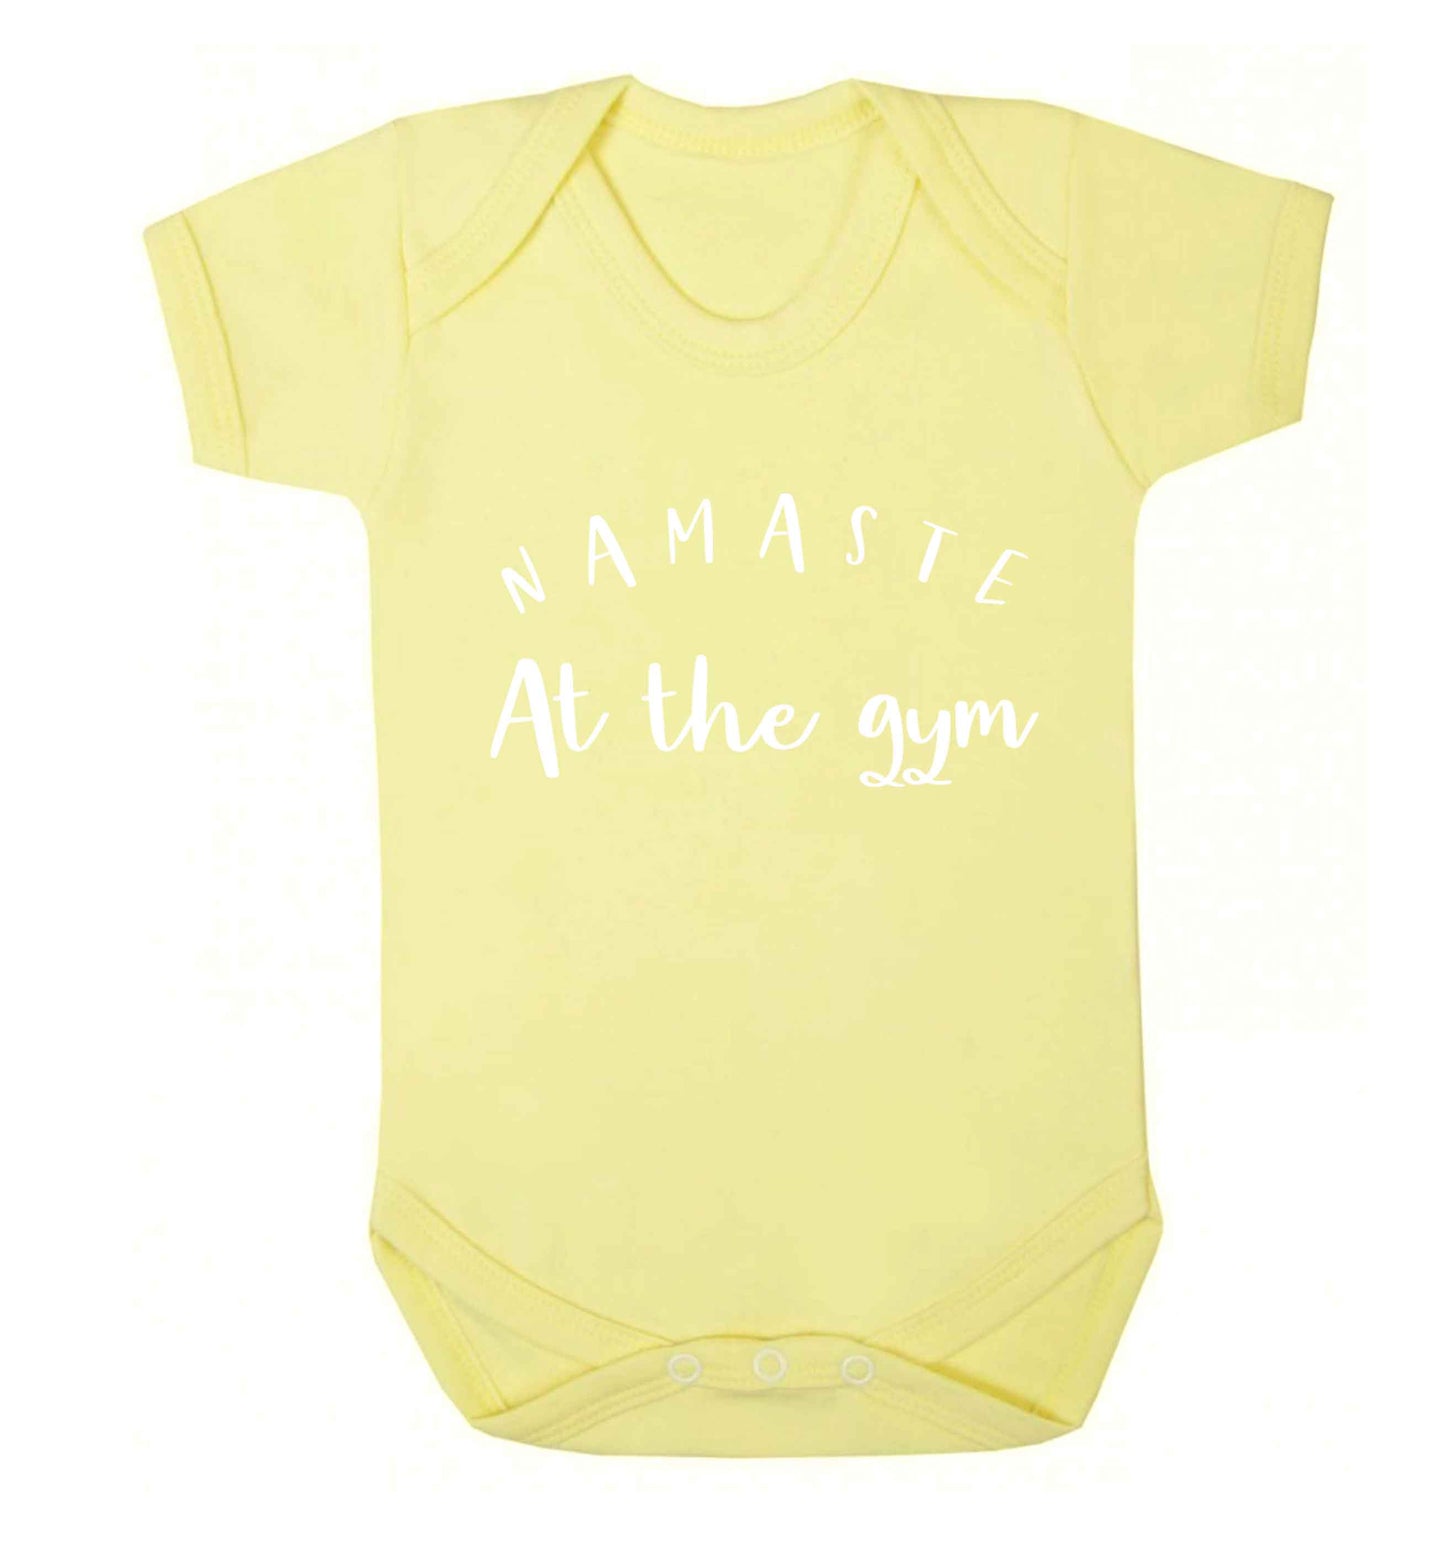 Namaste at the gym Baby Vest pale yellow 18-24 months